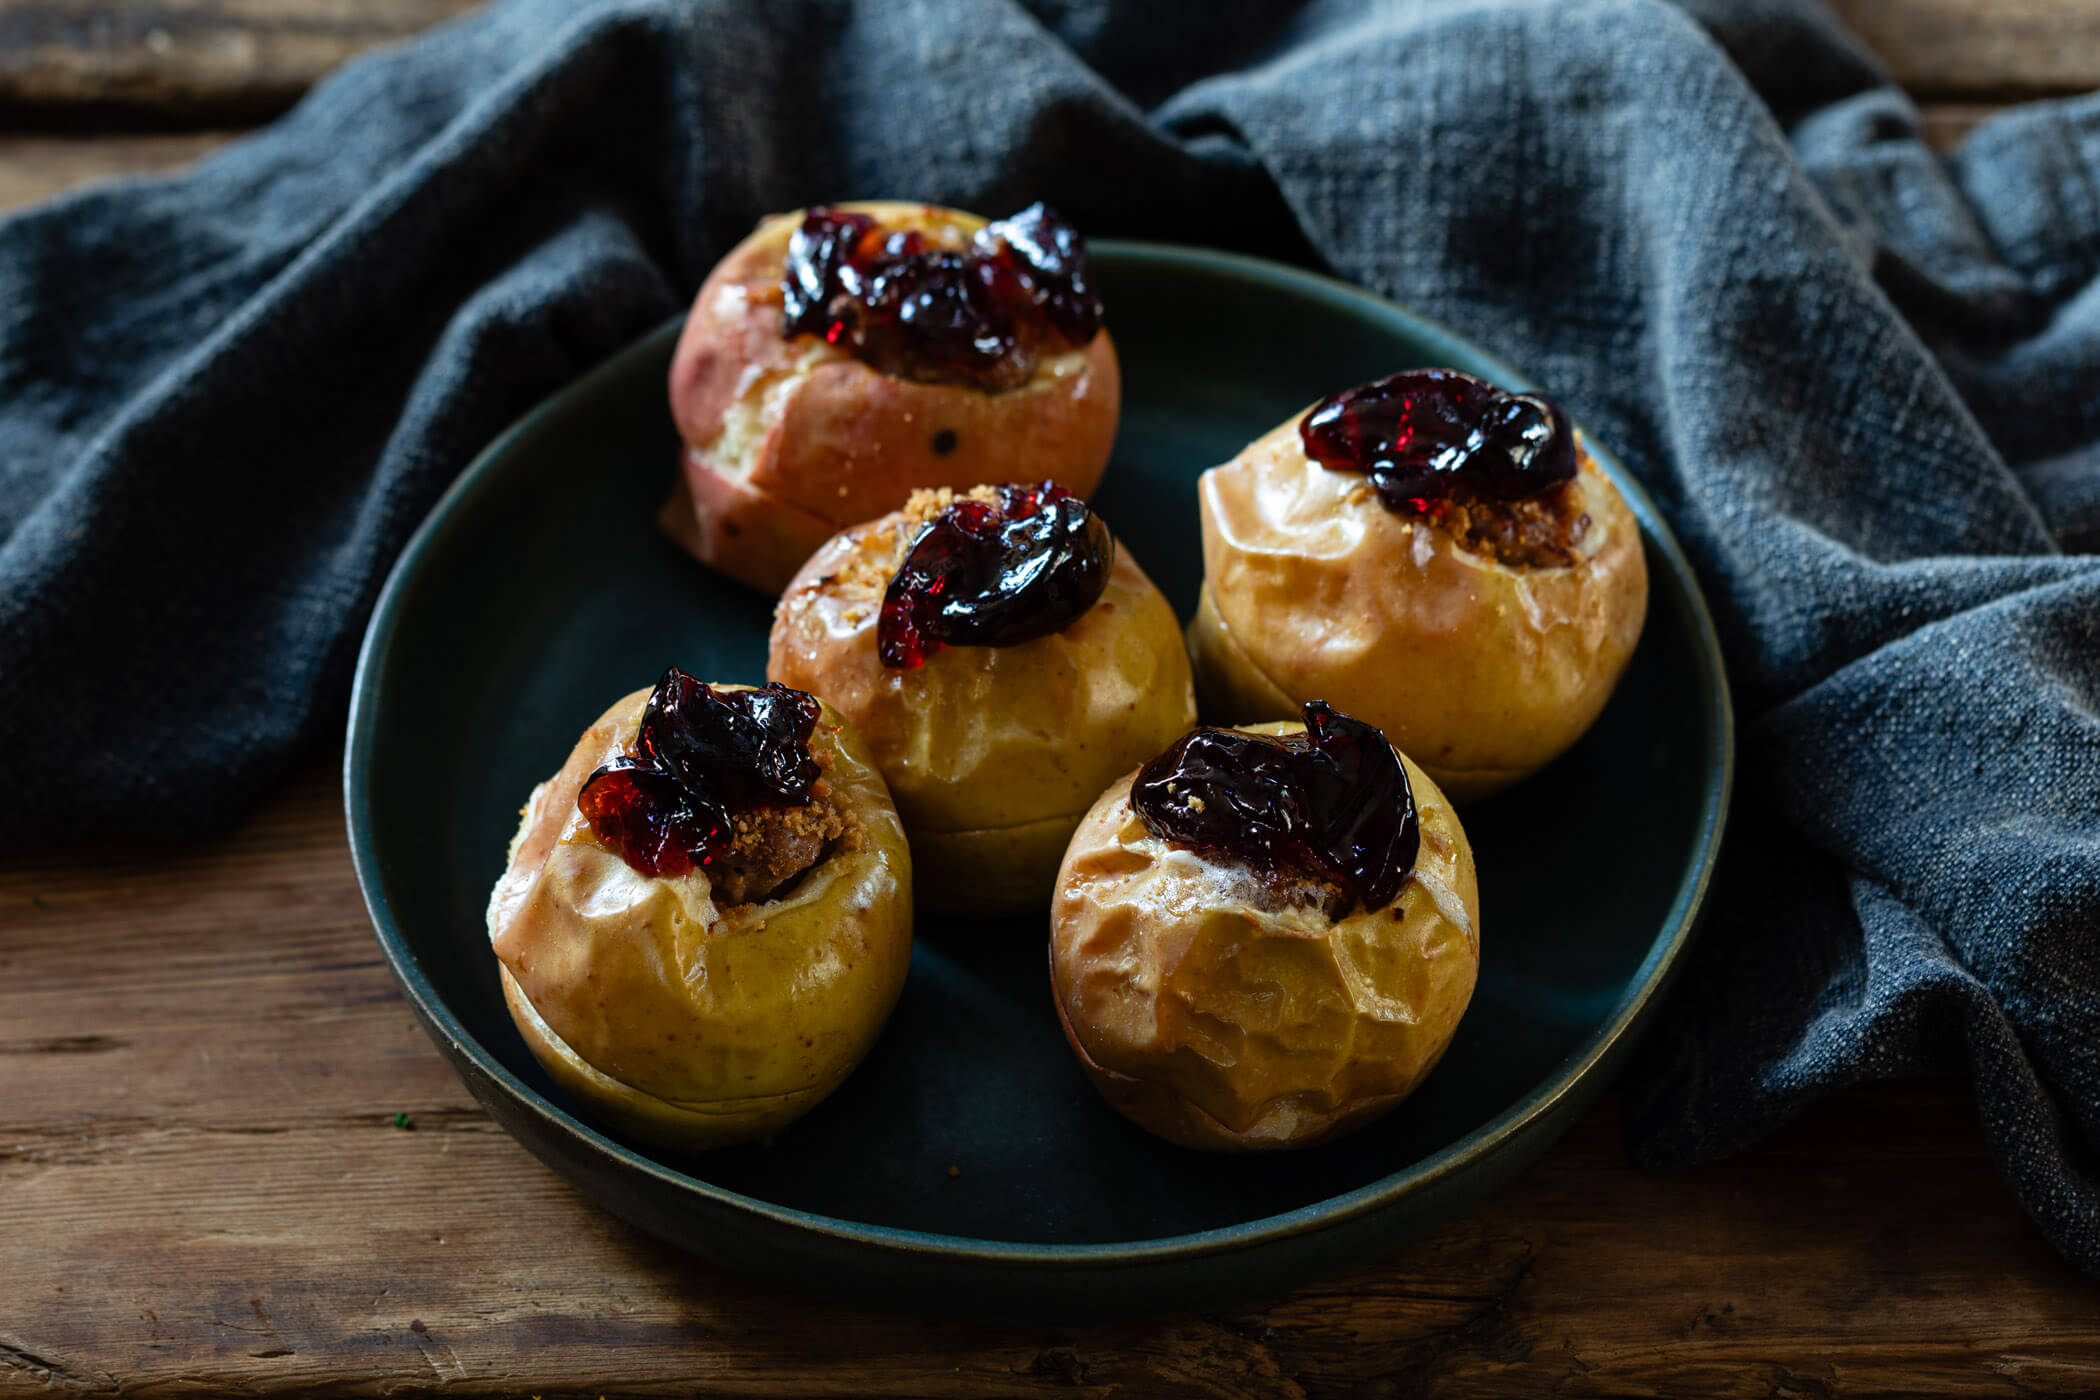 Five roasted Christmas apples filled with sausage and topped with jelly.